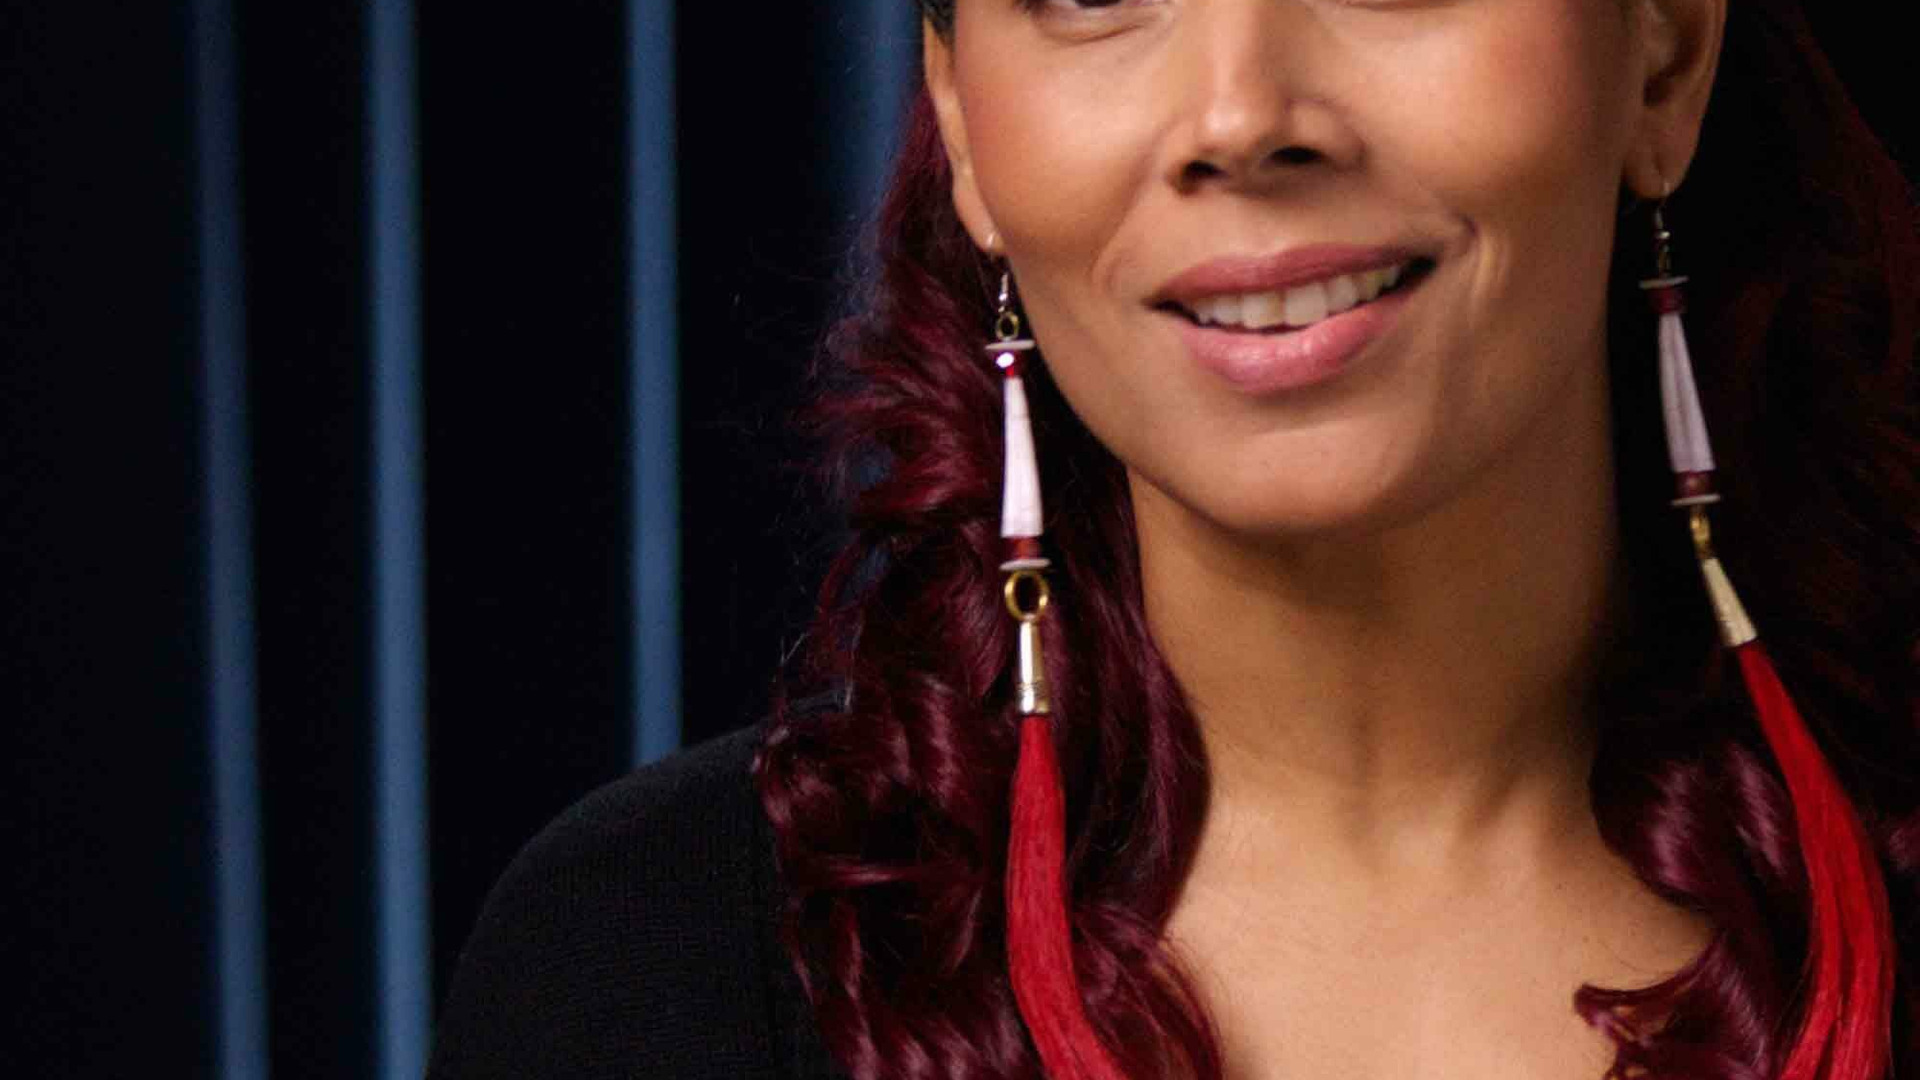 Show My Music with Rhiannon Giddens